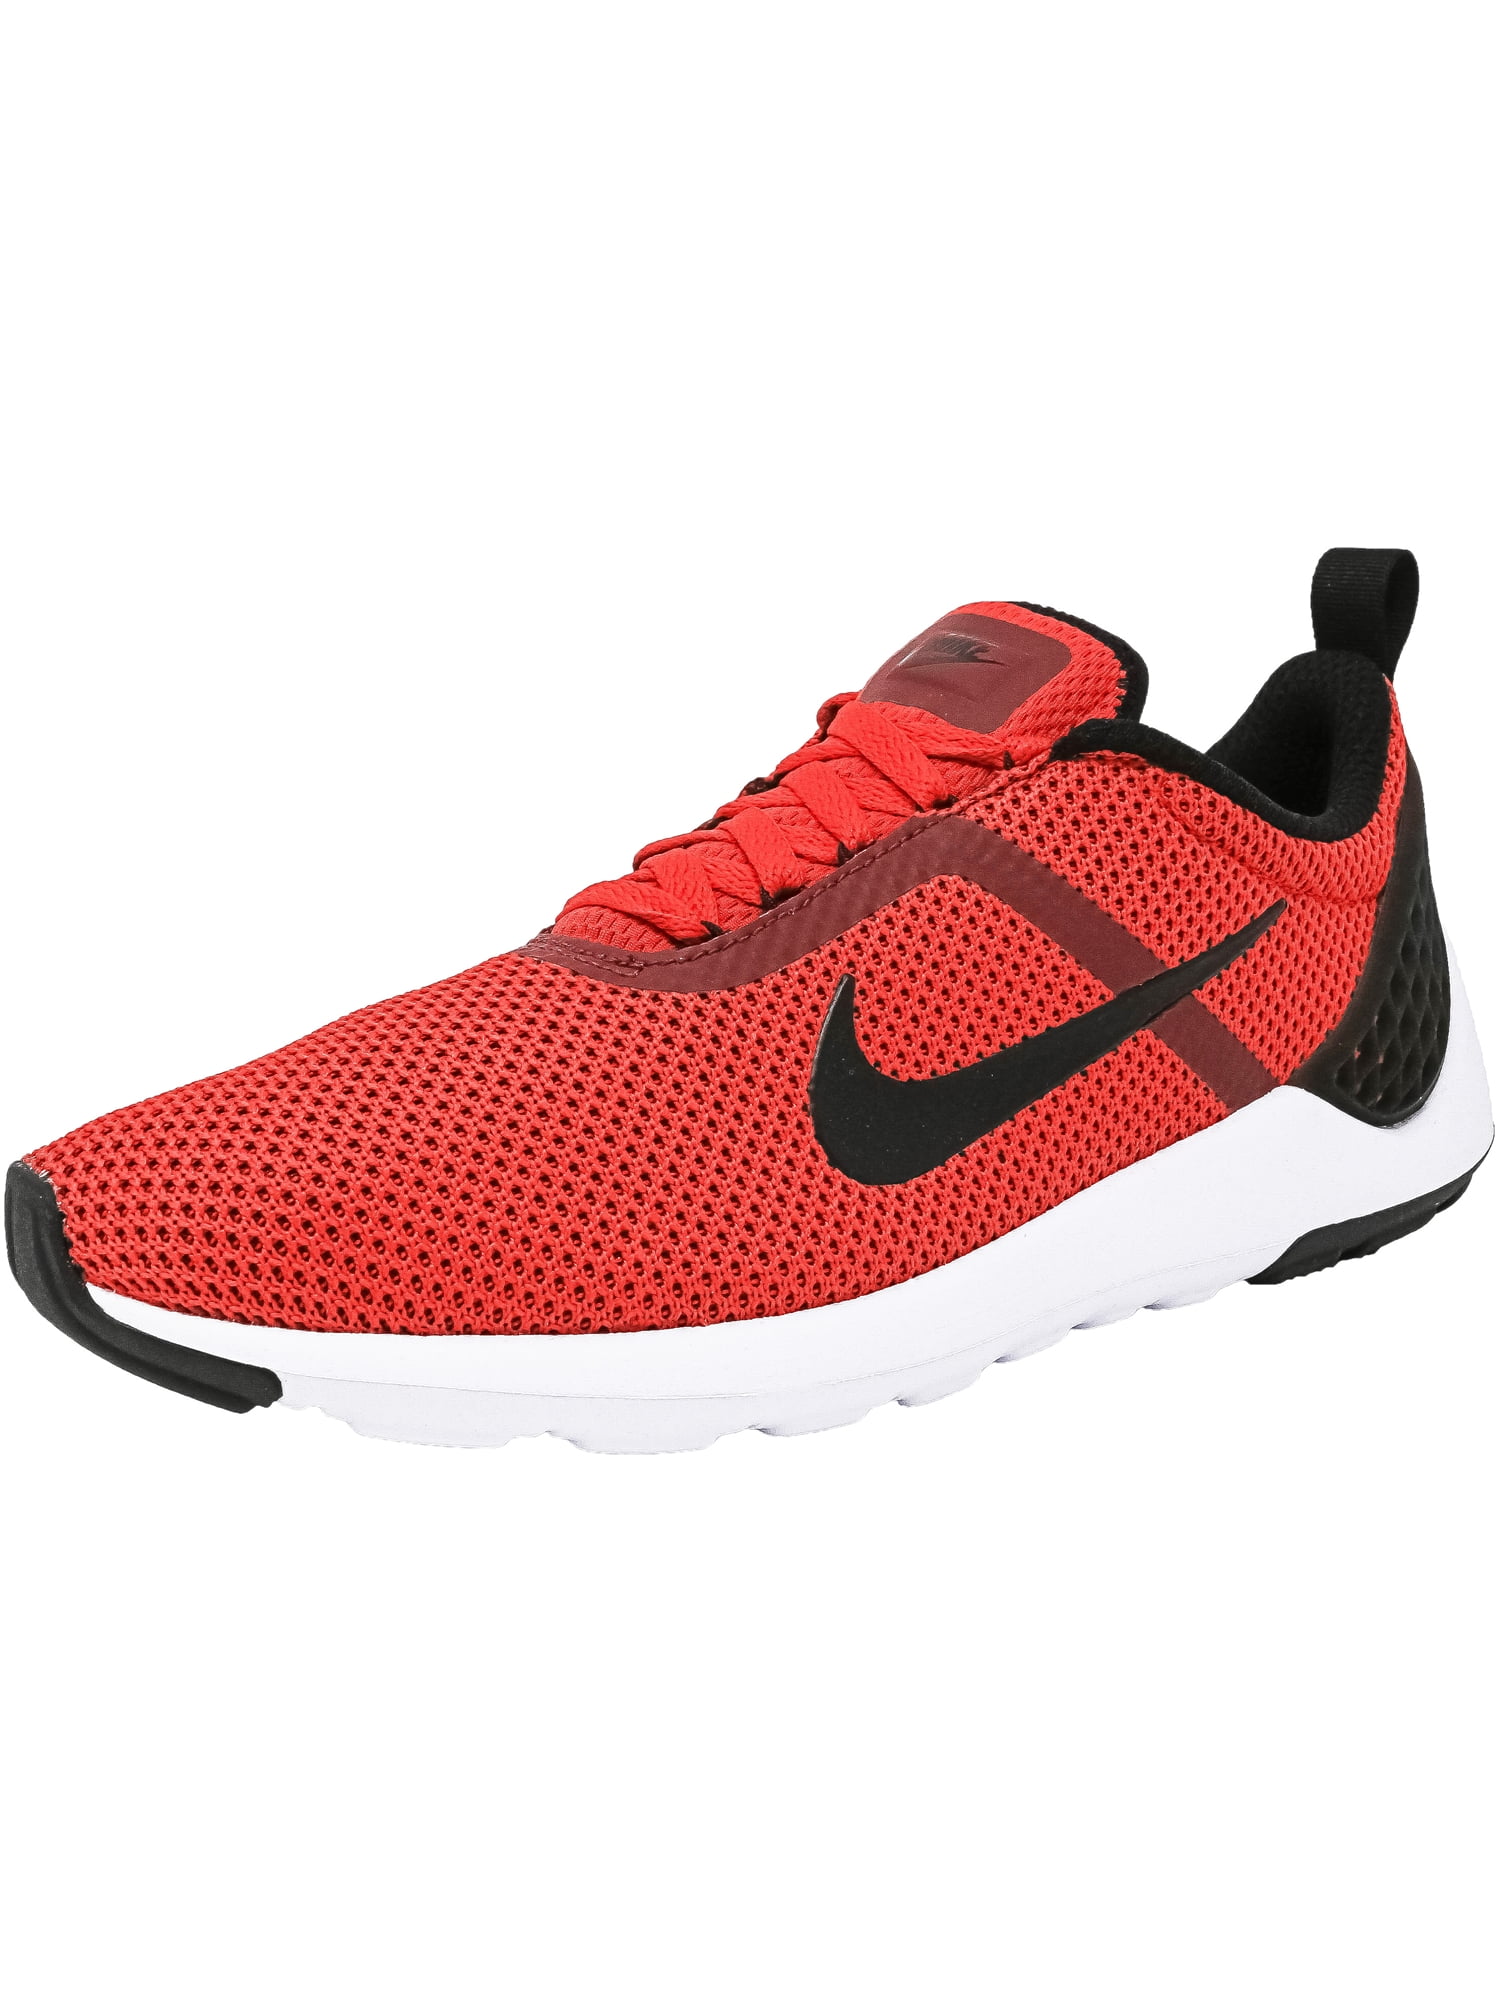 nike shoes red and black running